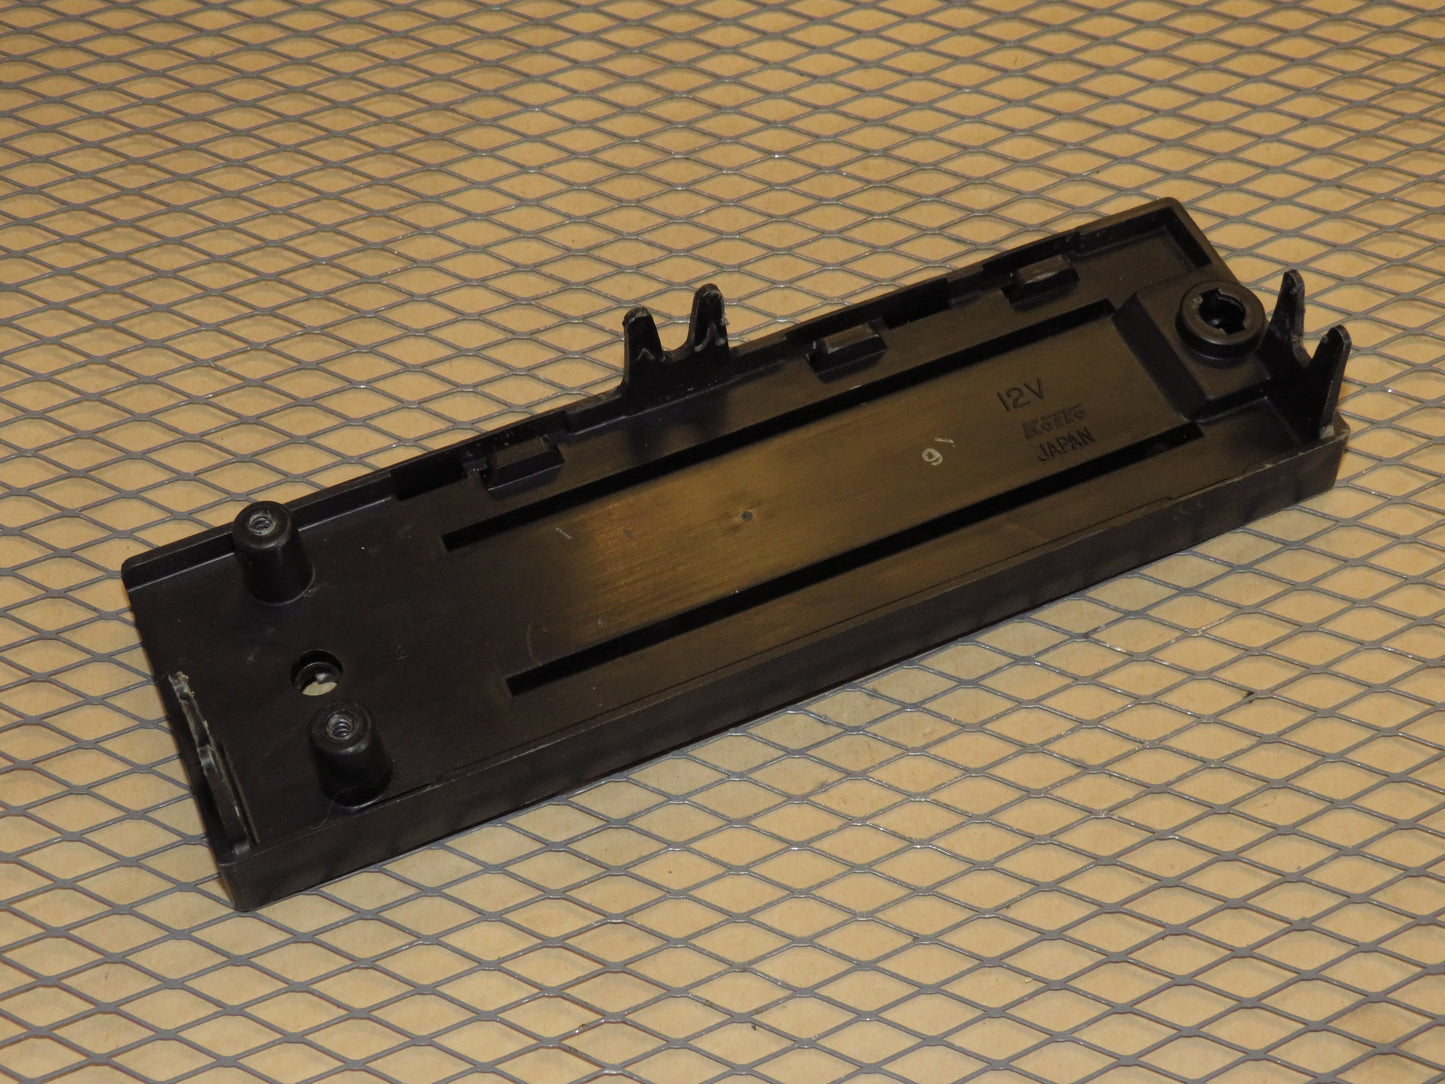 79 80 81 82 83 Datsun 280zx OEM Manual Climate Control Faceplate Cover